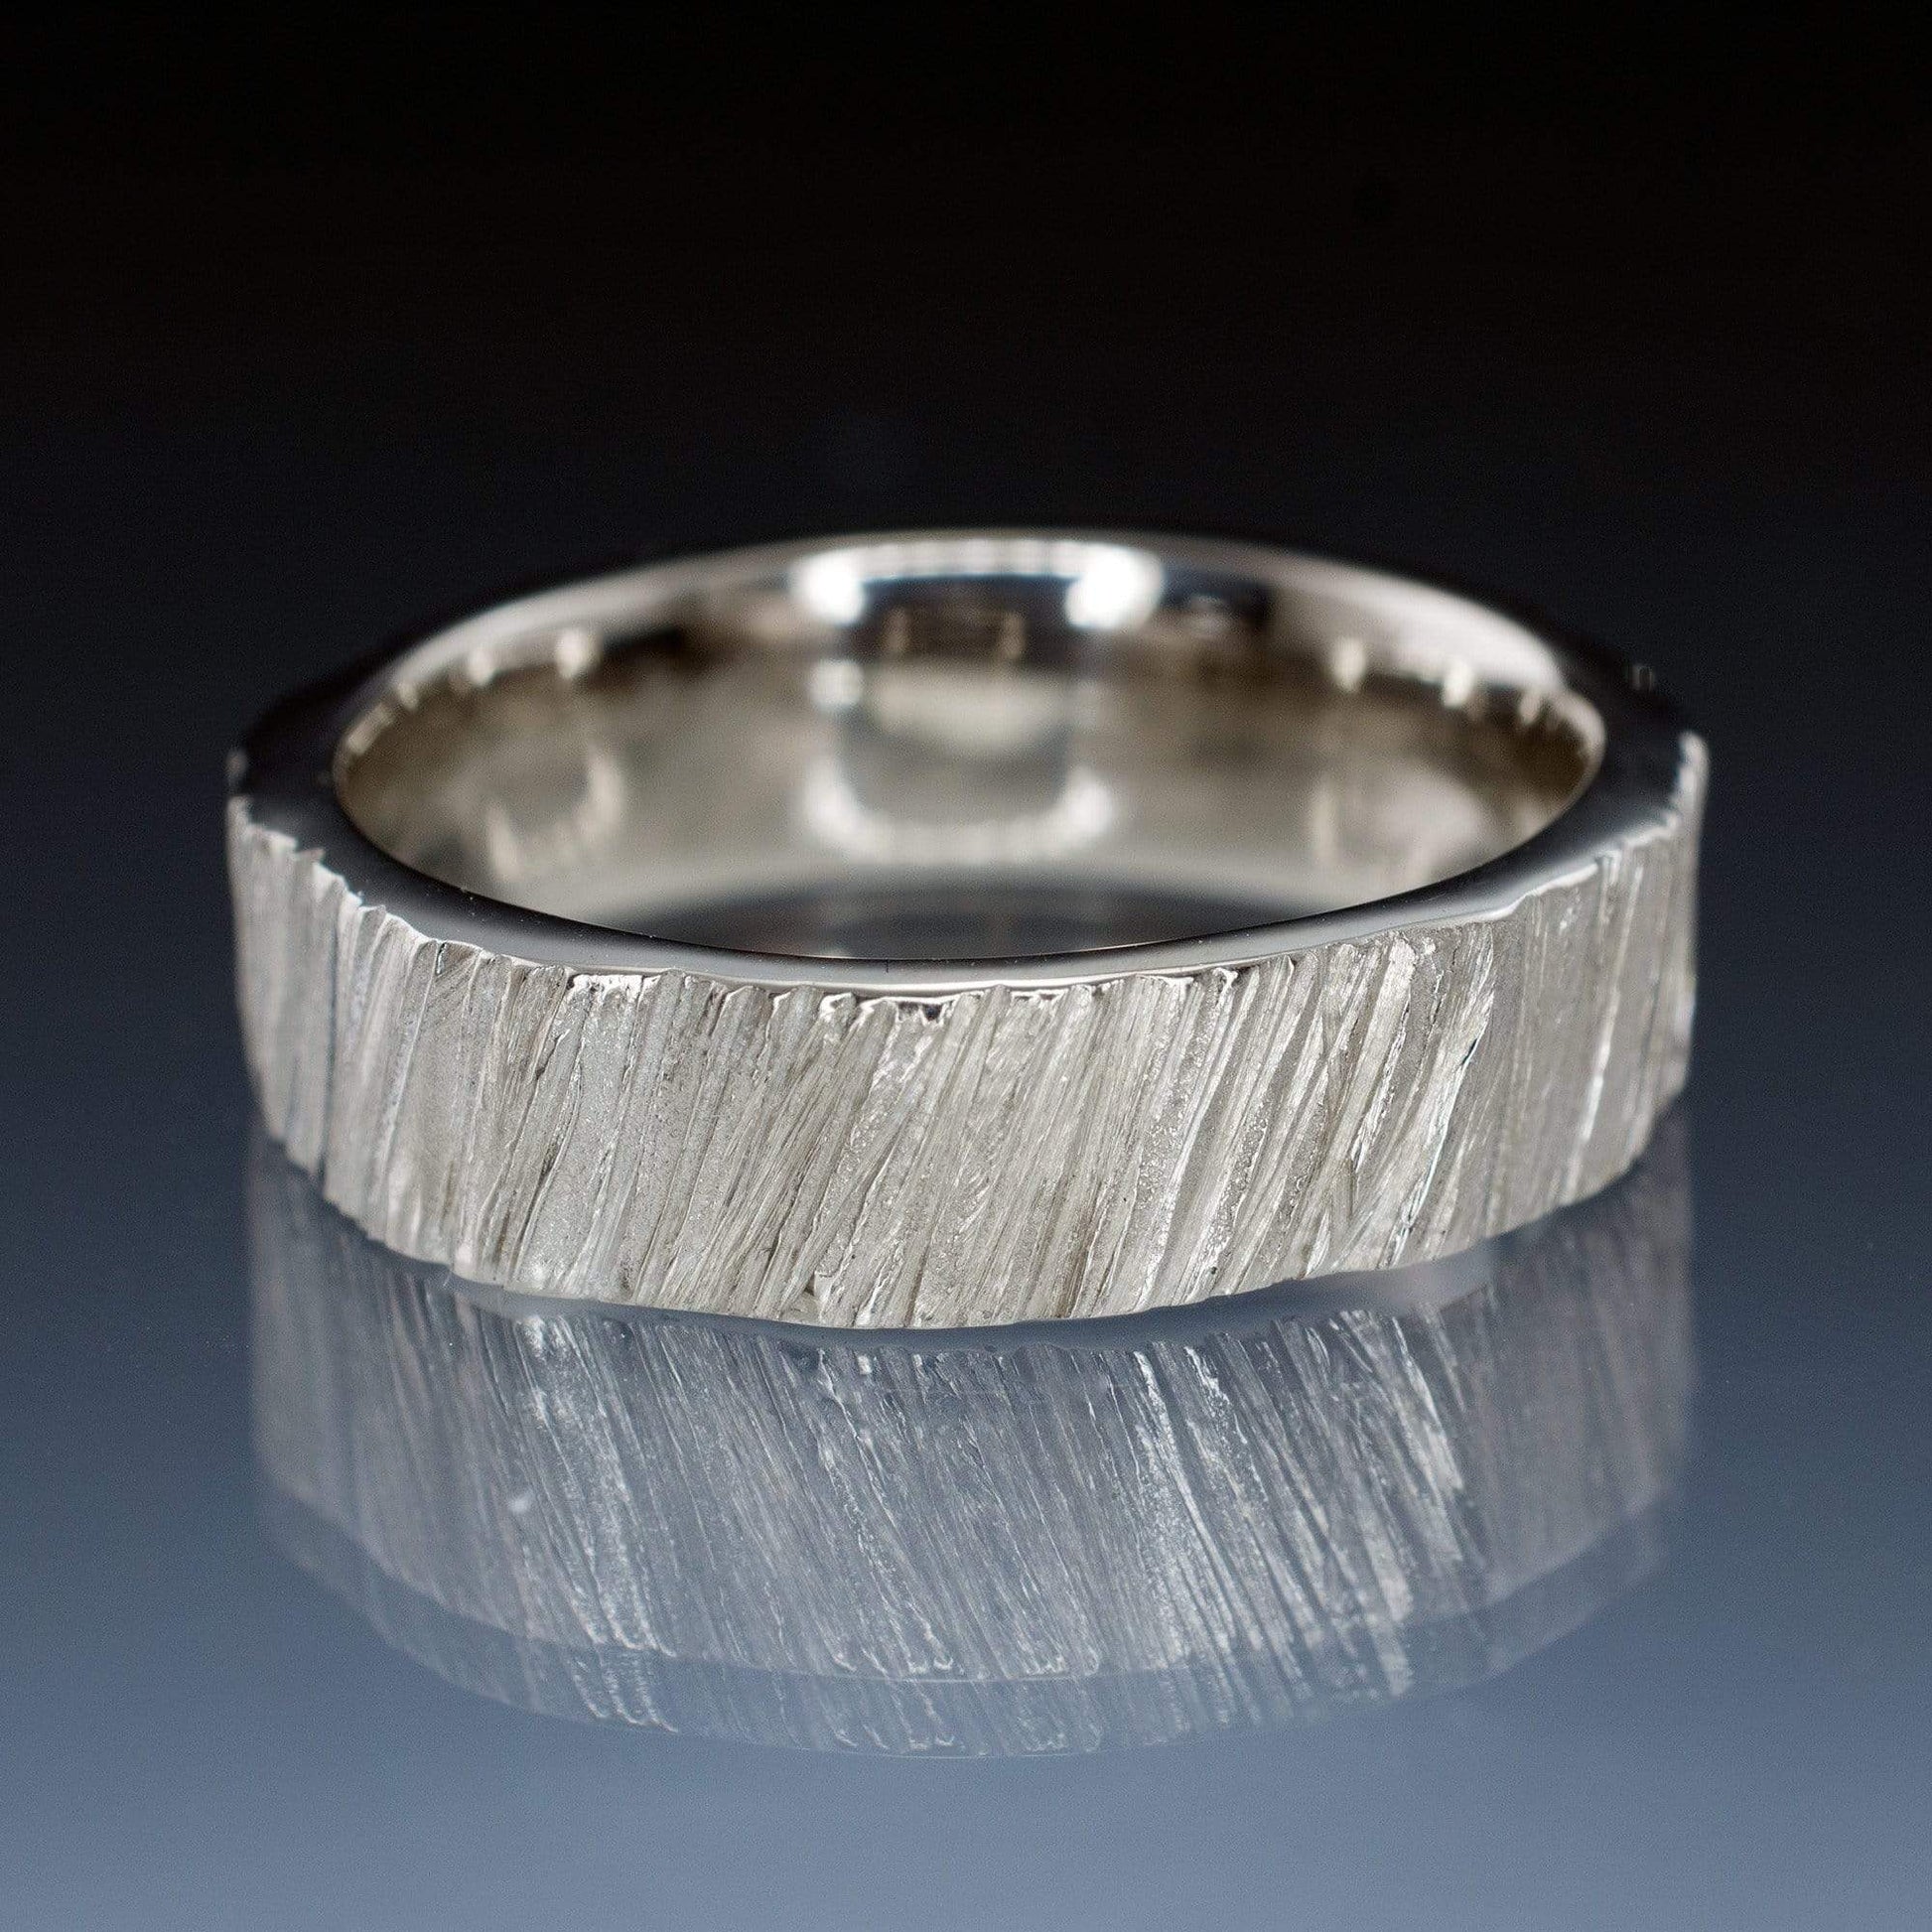 Wide Saw Cut Texture Wedding Band 4mm width / Sterling Silver Ring by Nodeform